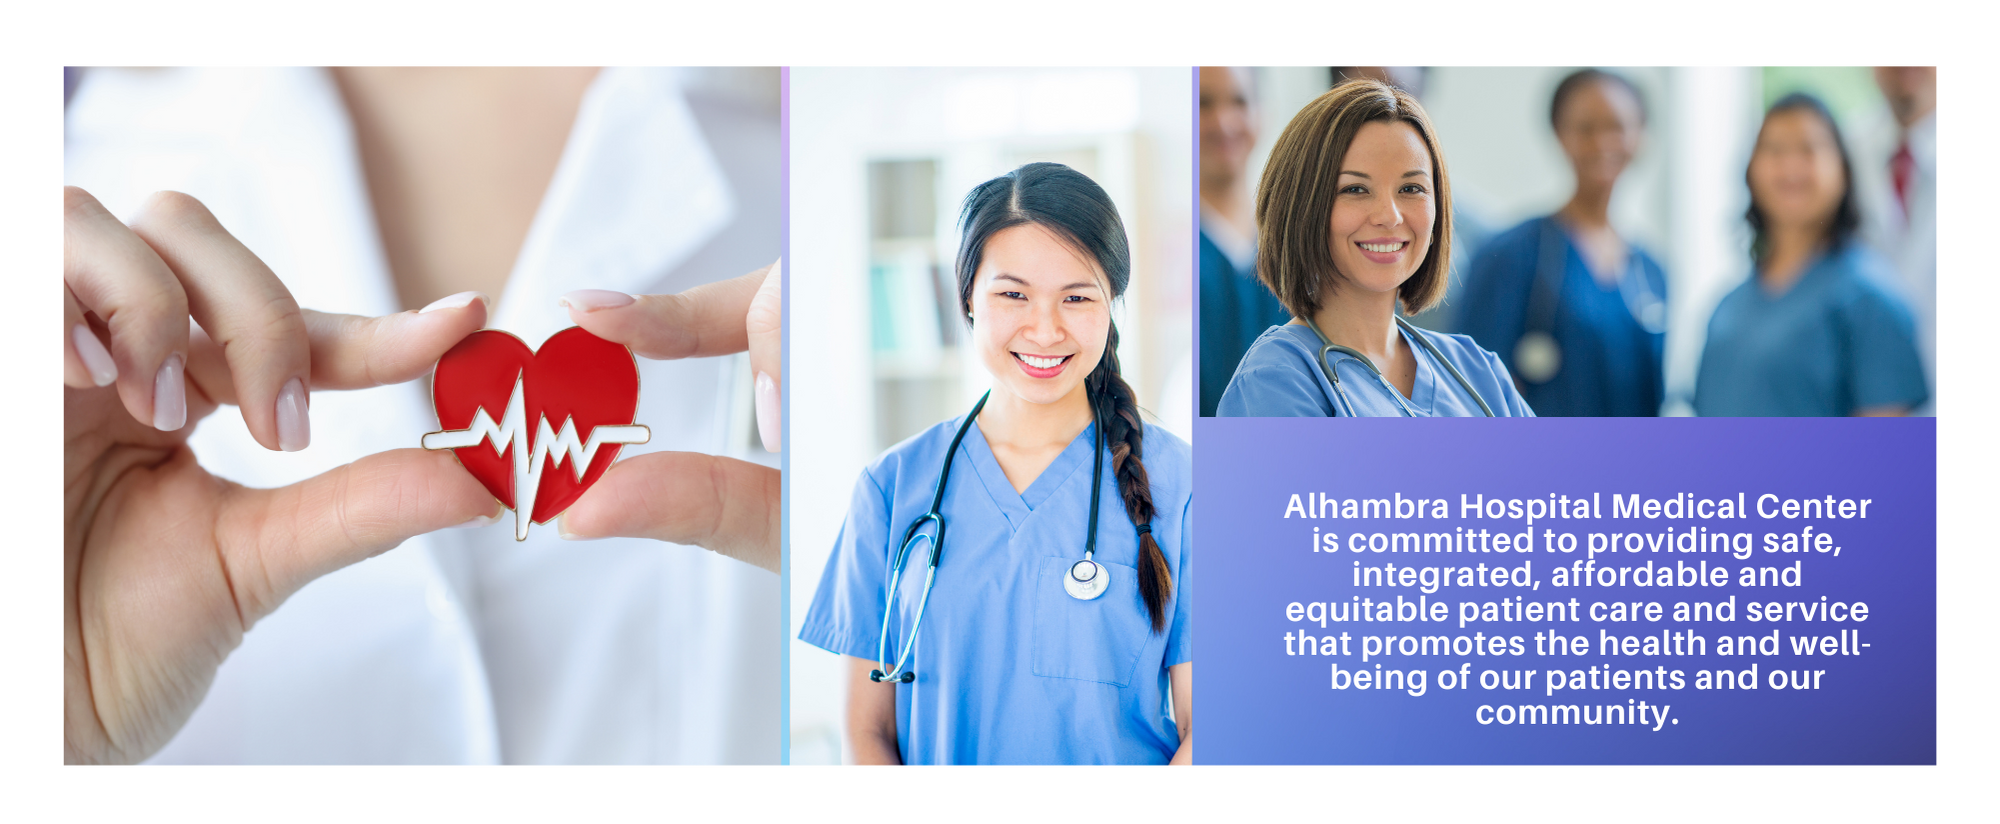 Alhambra Hospital Medical Cenrer is committed to providing safe, integrated, affordable and equitable patient care and service that promotes the health and well-being of our patients and our community.